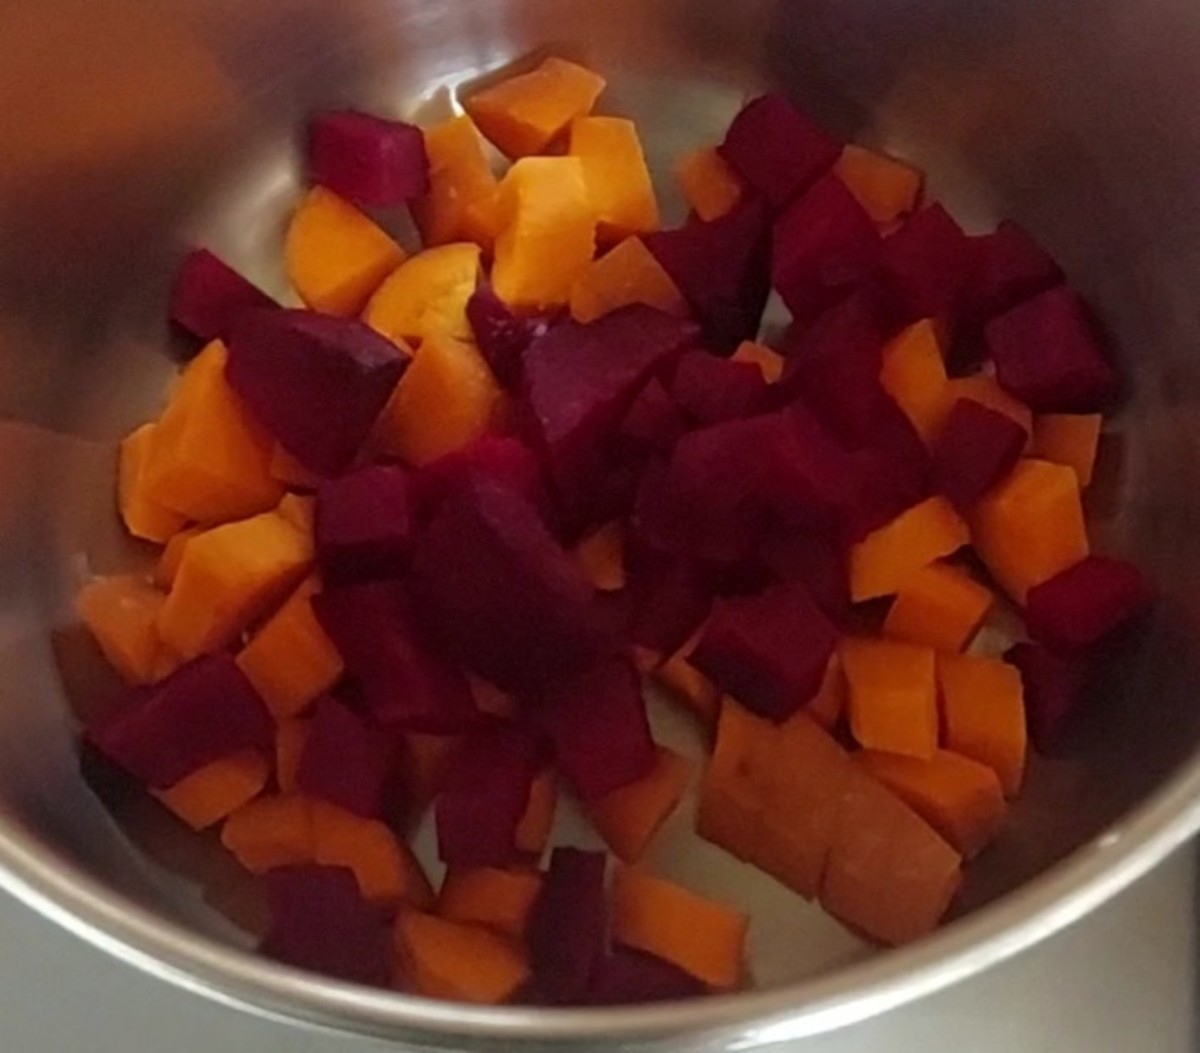 Add 1 cubed carrot and 1/2 cubed beetroot to a pot.